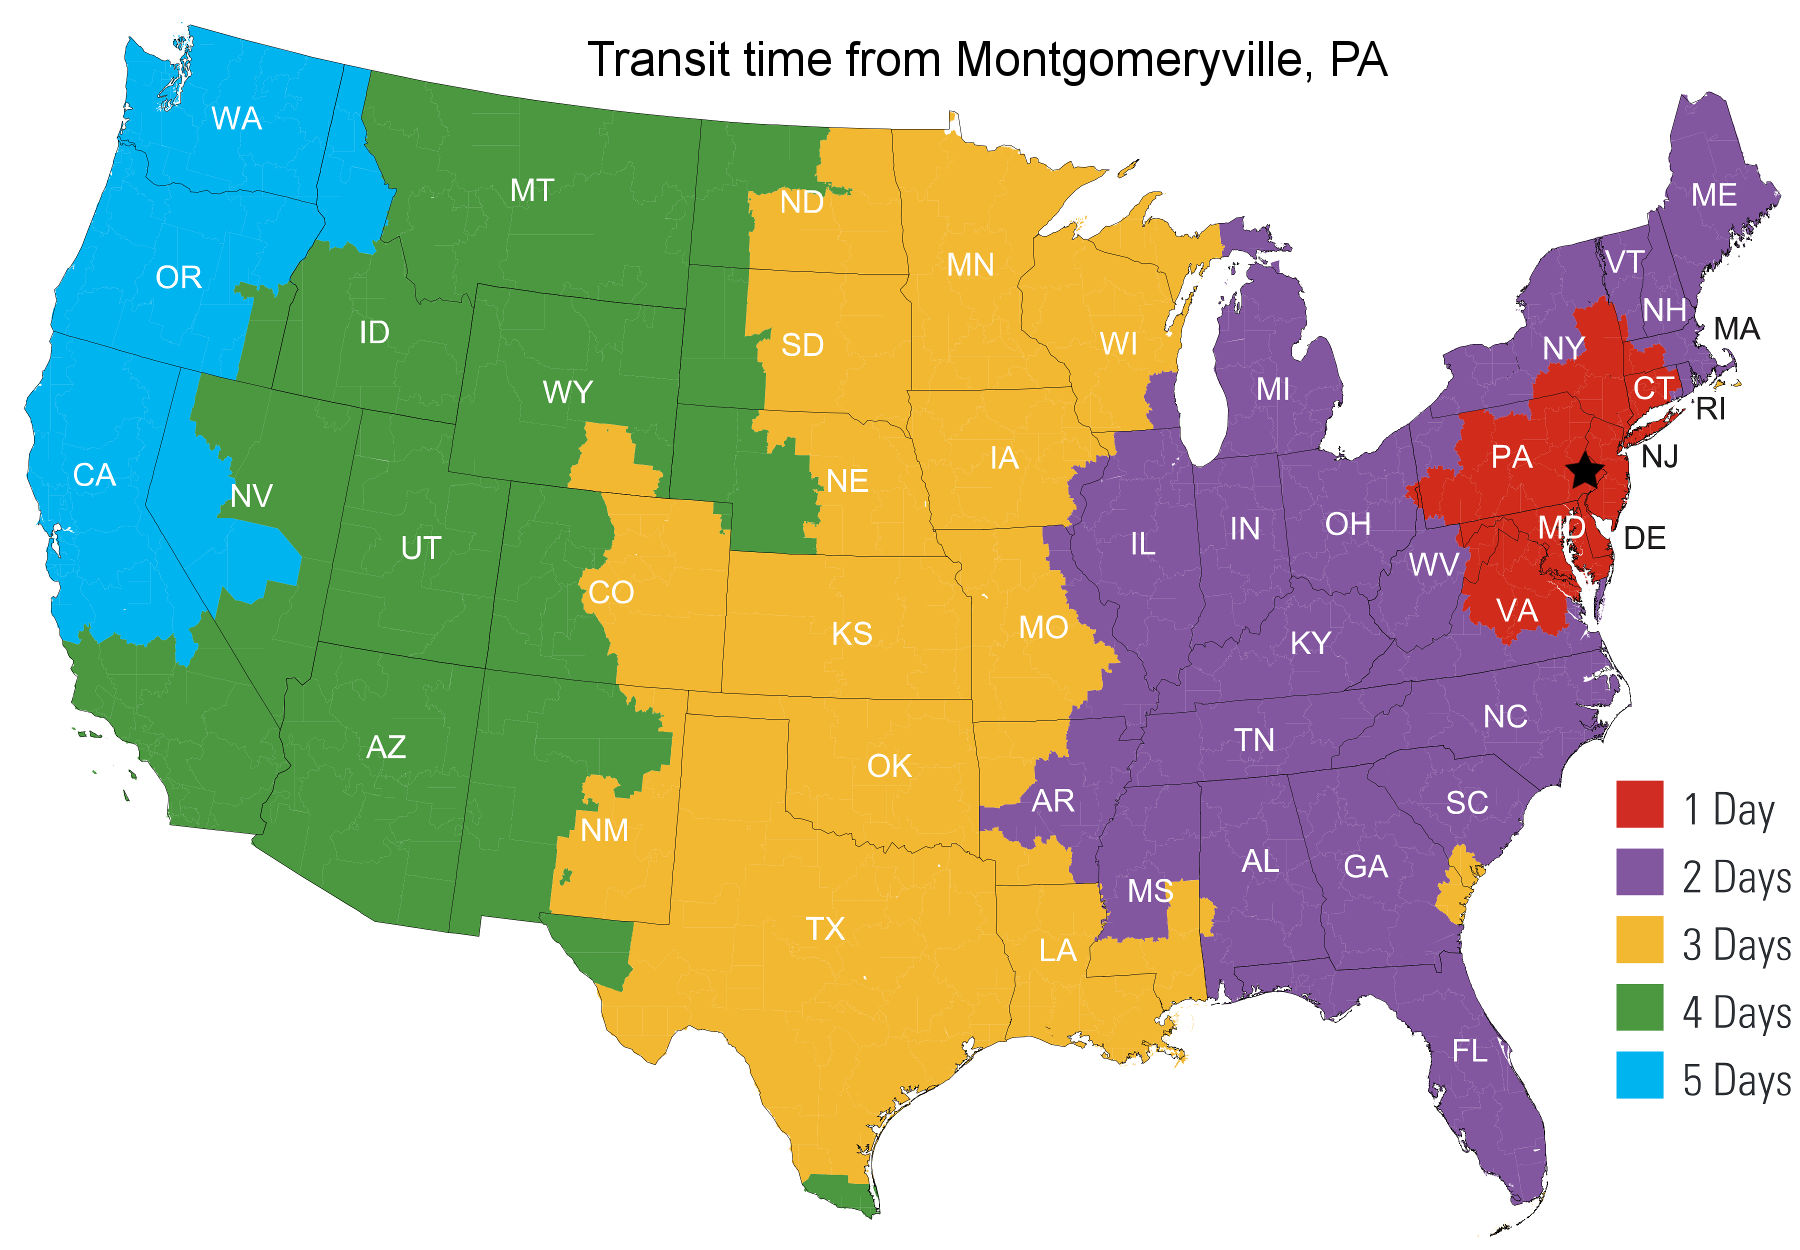 Transit time map from Montgomeryville, PA